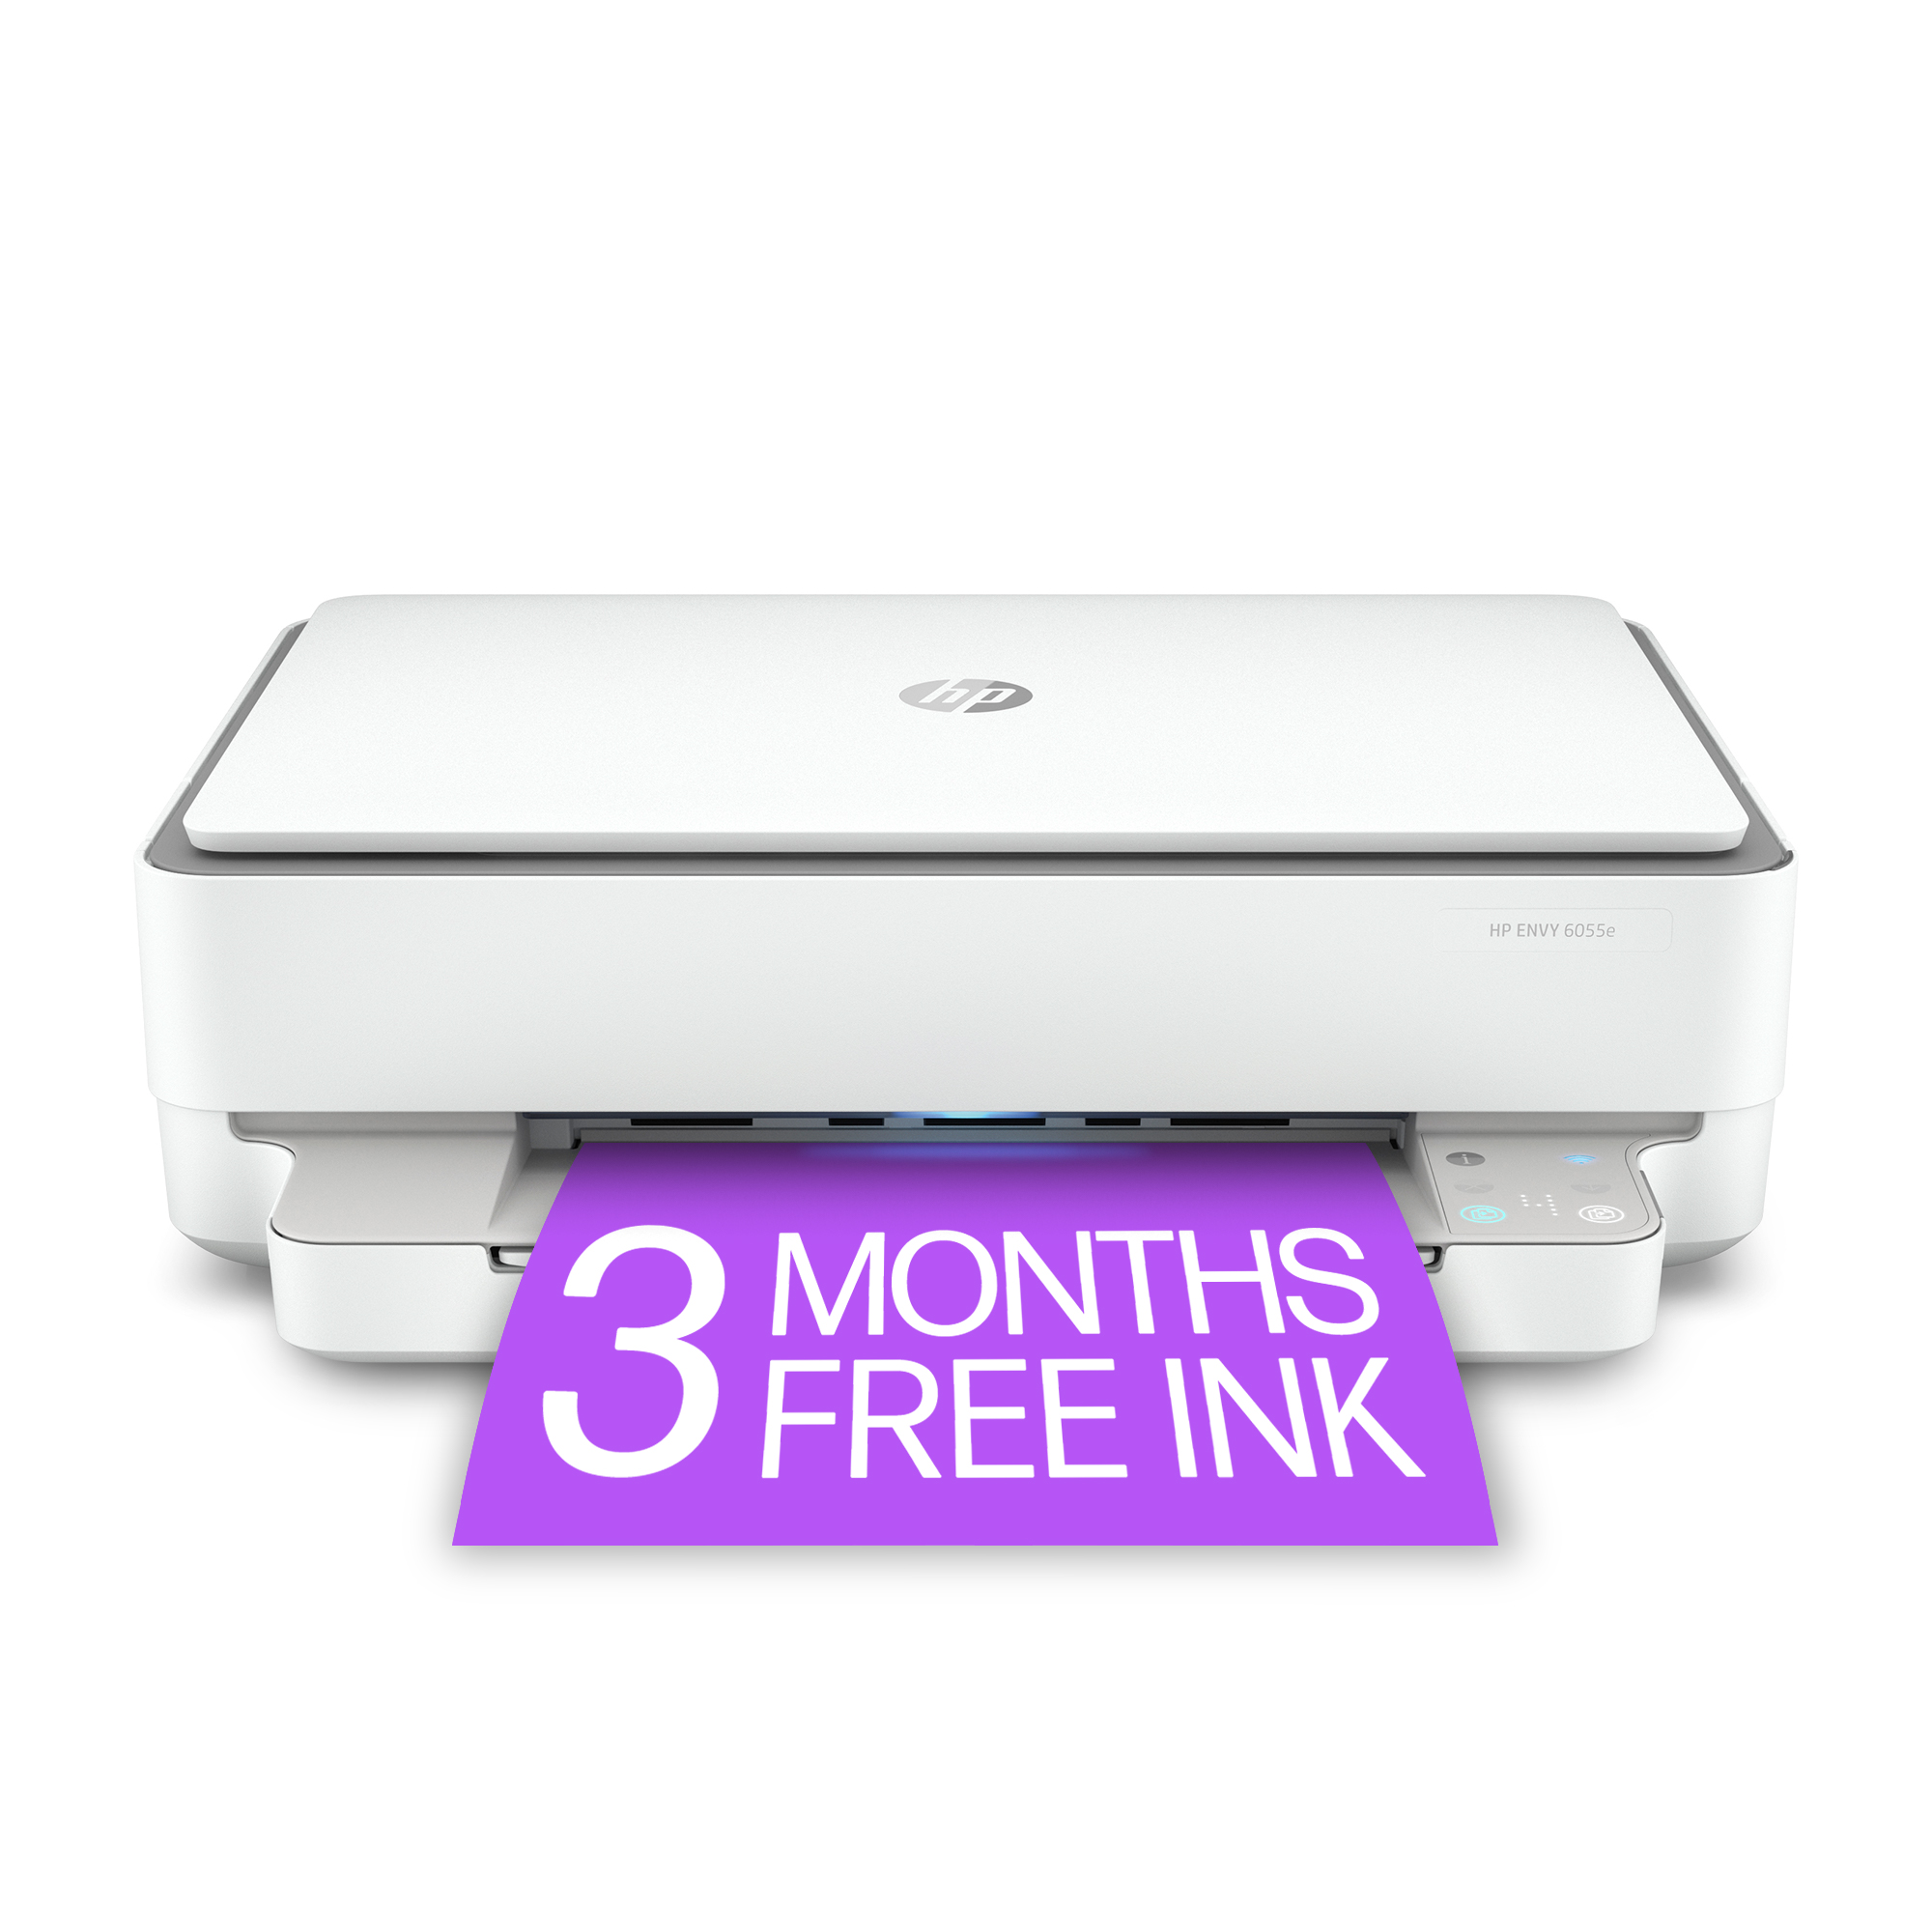 HP ENVY 6055e Wireless Inkjet Printer with months of Instant Ink Included with HP+ White ENVY 6055e - Best Buy